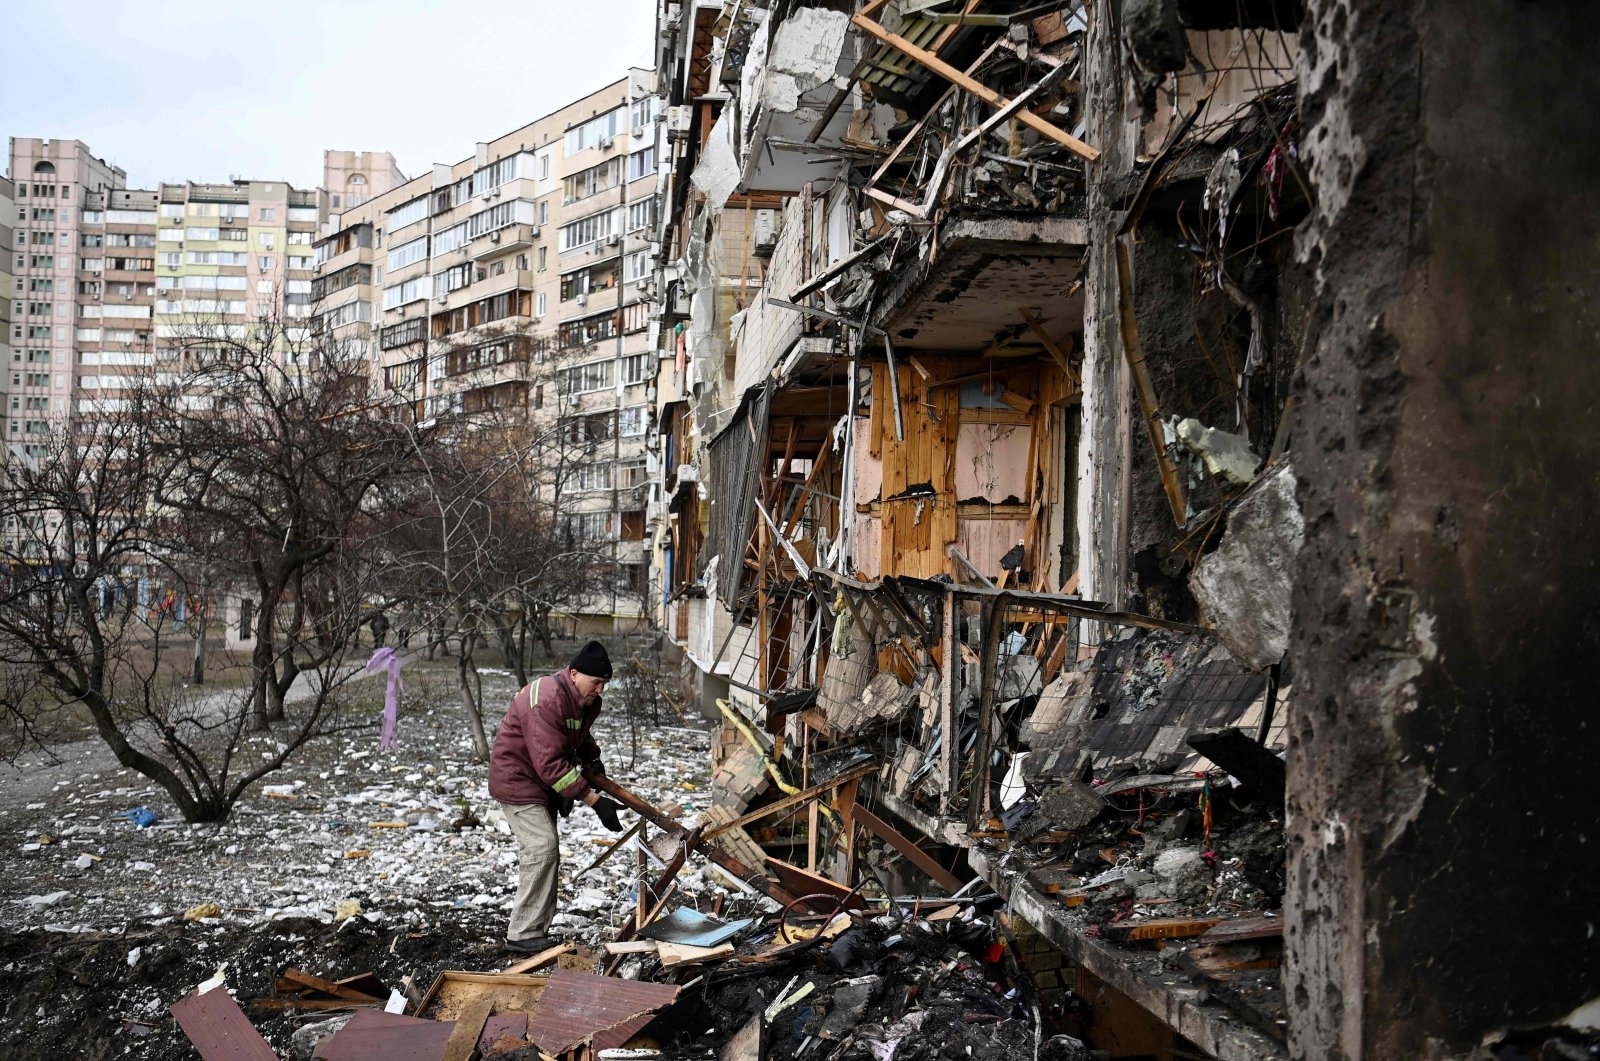 A man clears debris at a damaged residential building at Koshytsa Street, a suburb of the Ukrainian capital Kyiv, where a military shell allegedly hit, Feb.25, 2022. (AFP Photo)